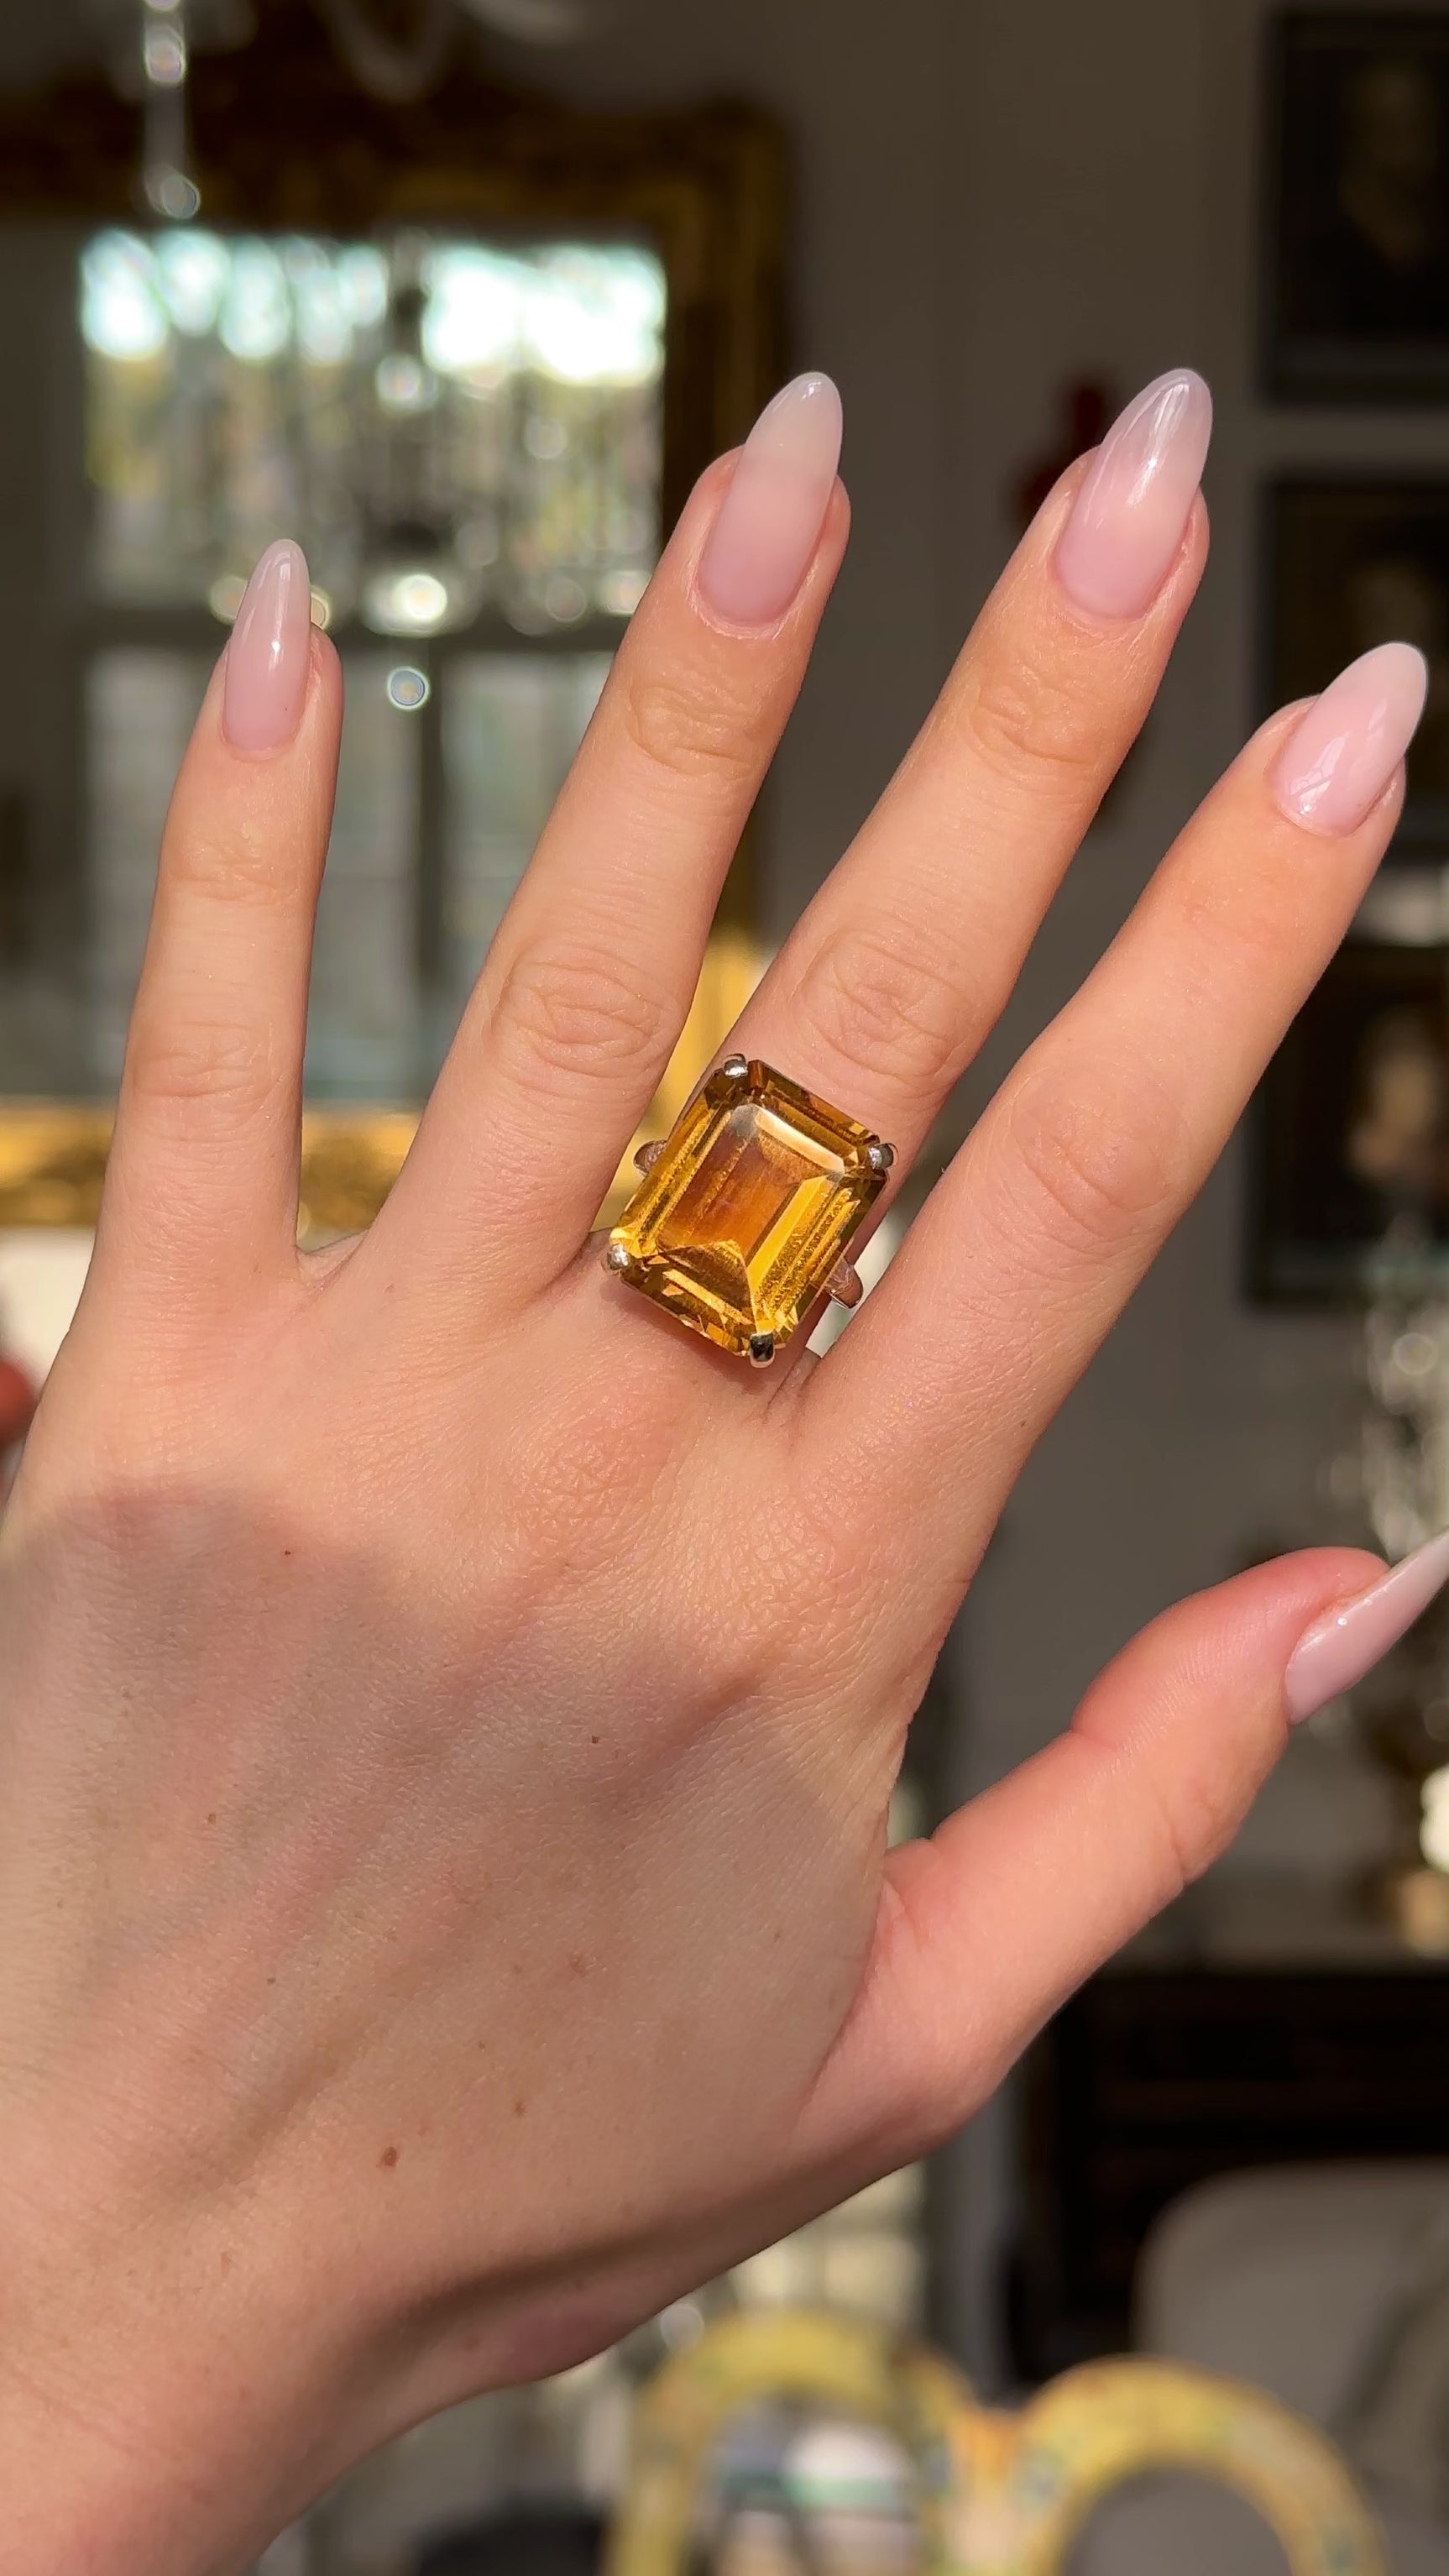 vintage cartier citrine cocktail ring worn on hand and moved around to give perspective.